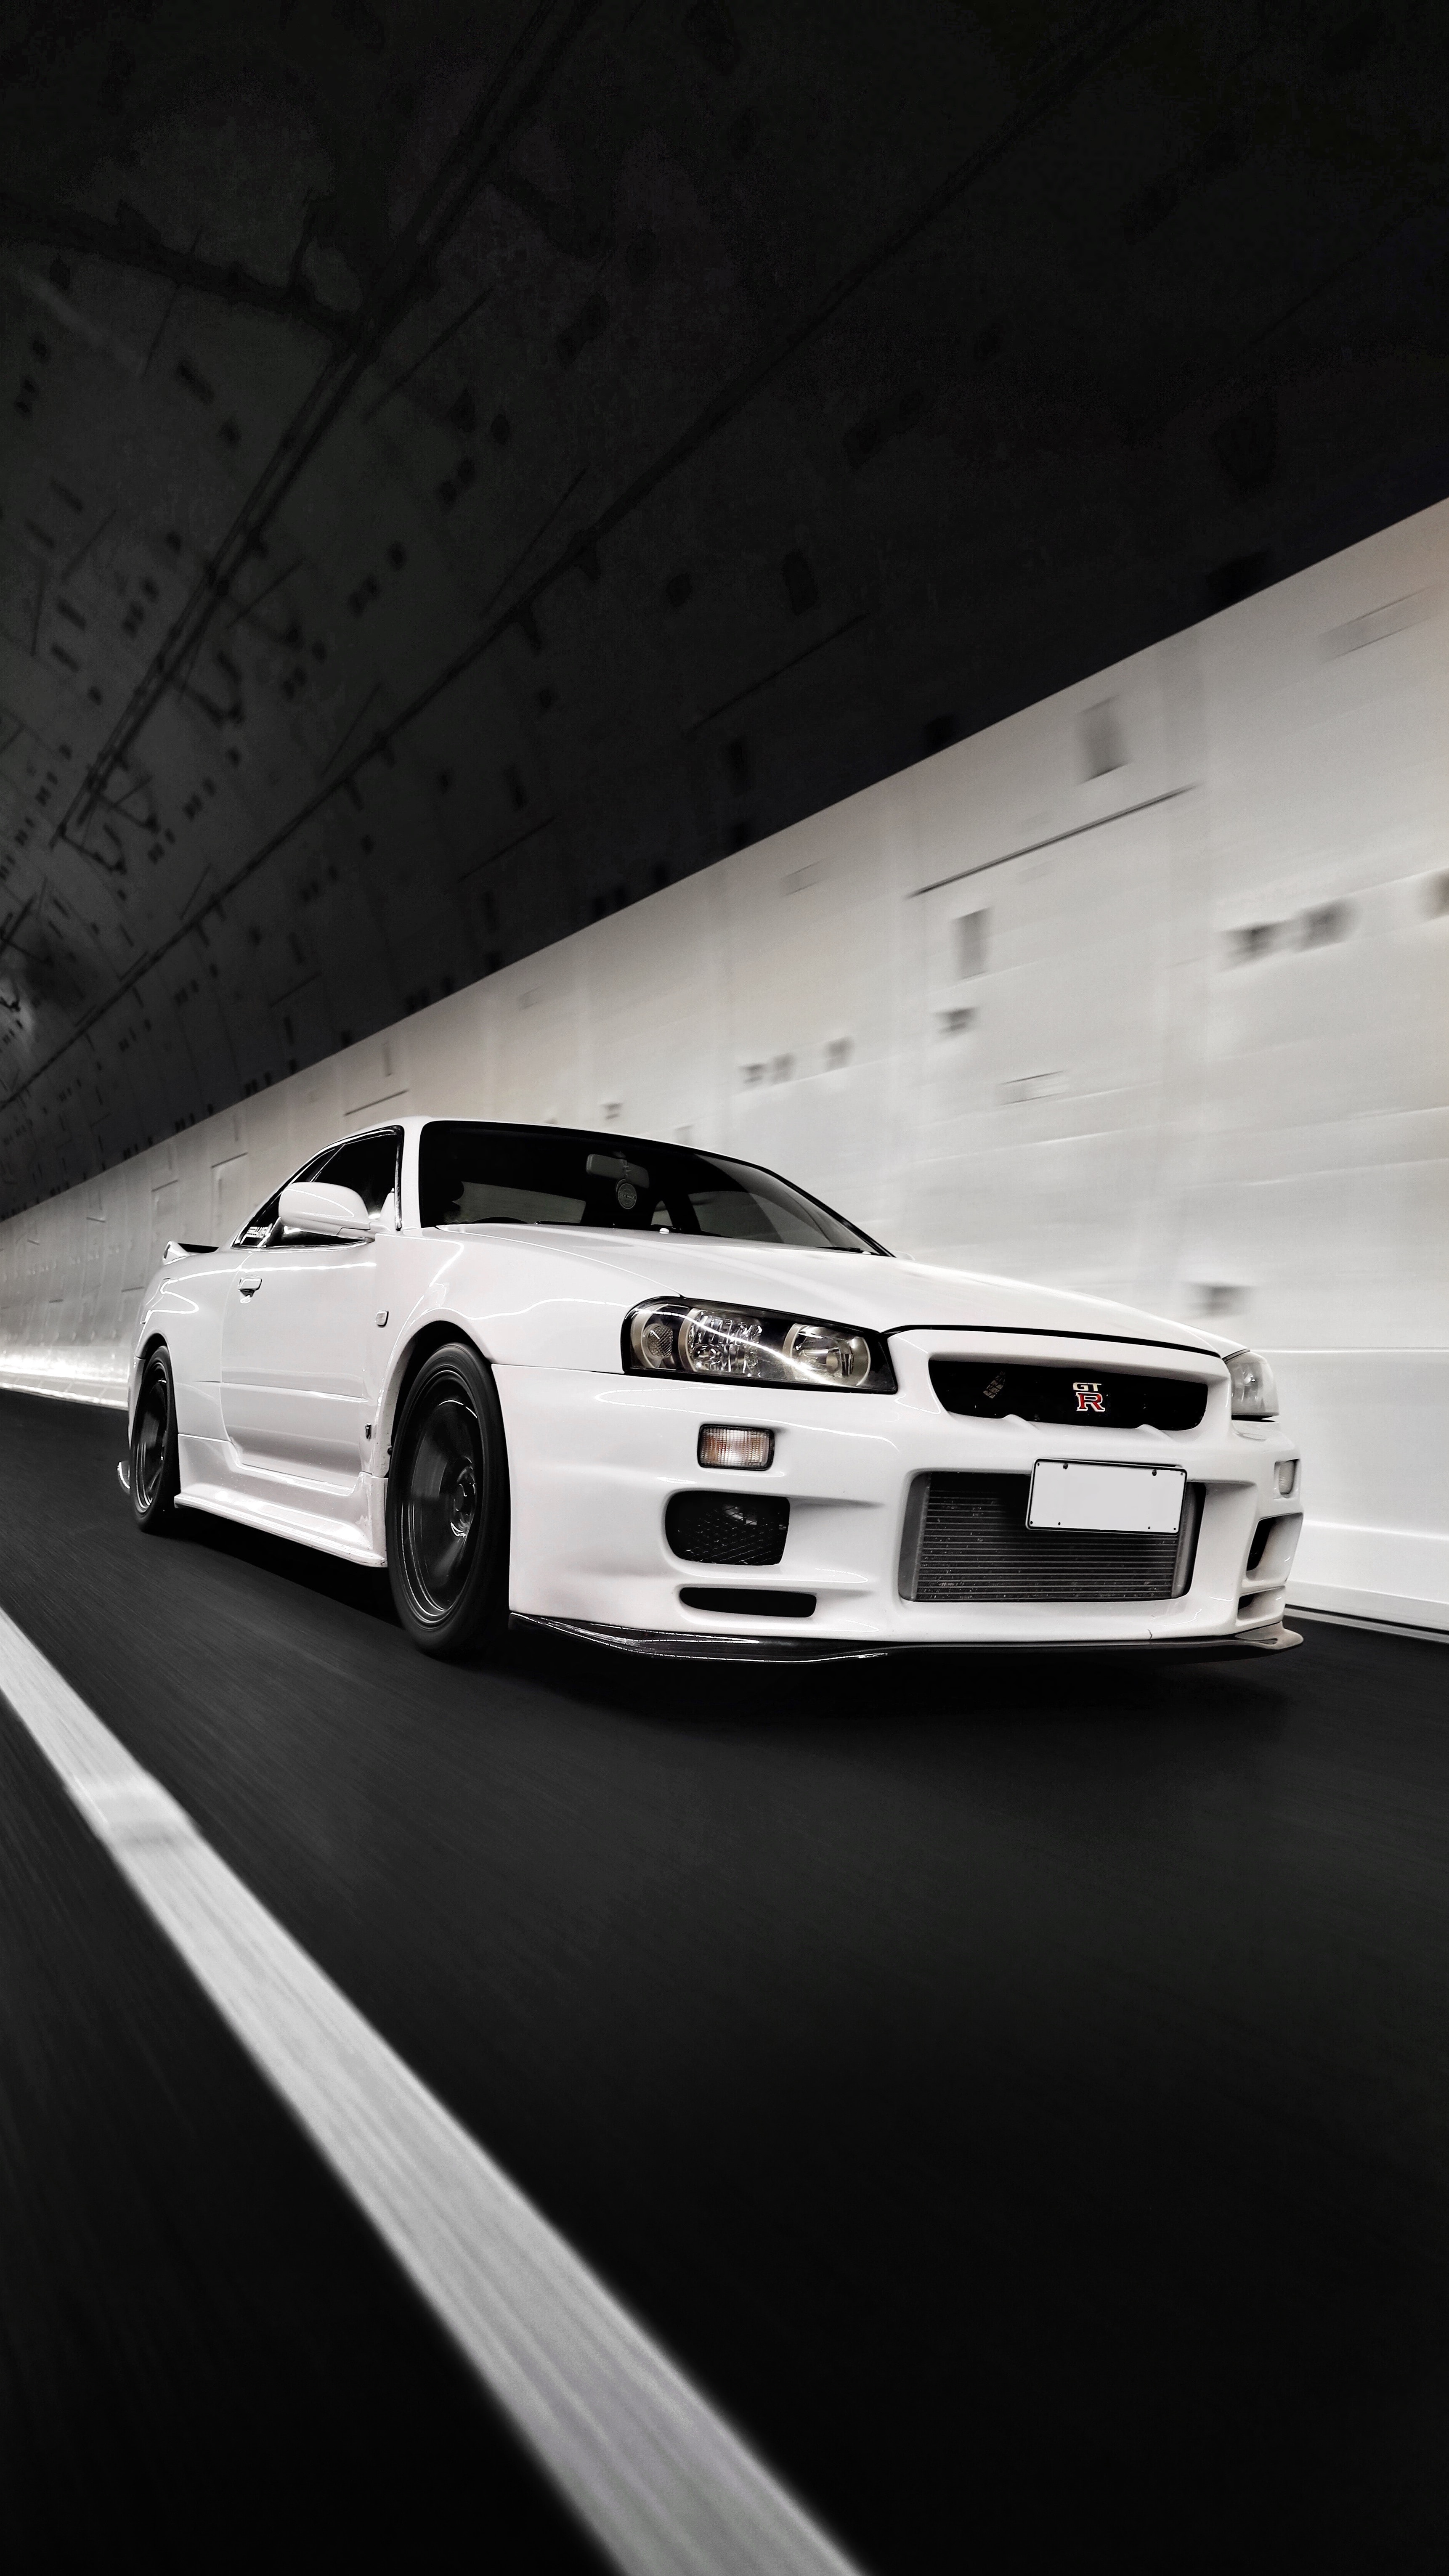 nissan, cars, white, traffic, movement, side view, nissan gt r